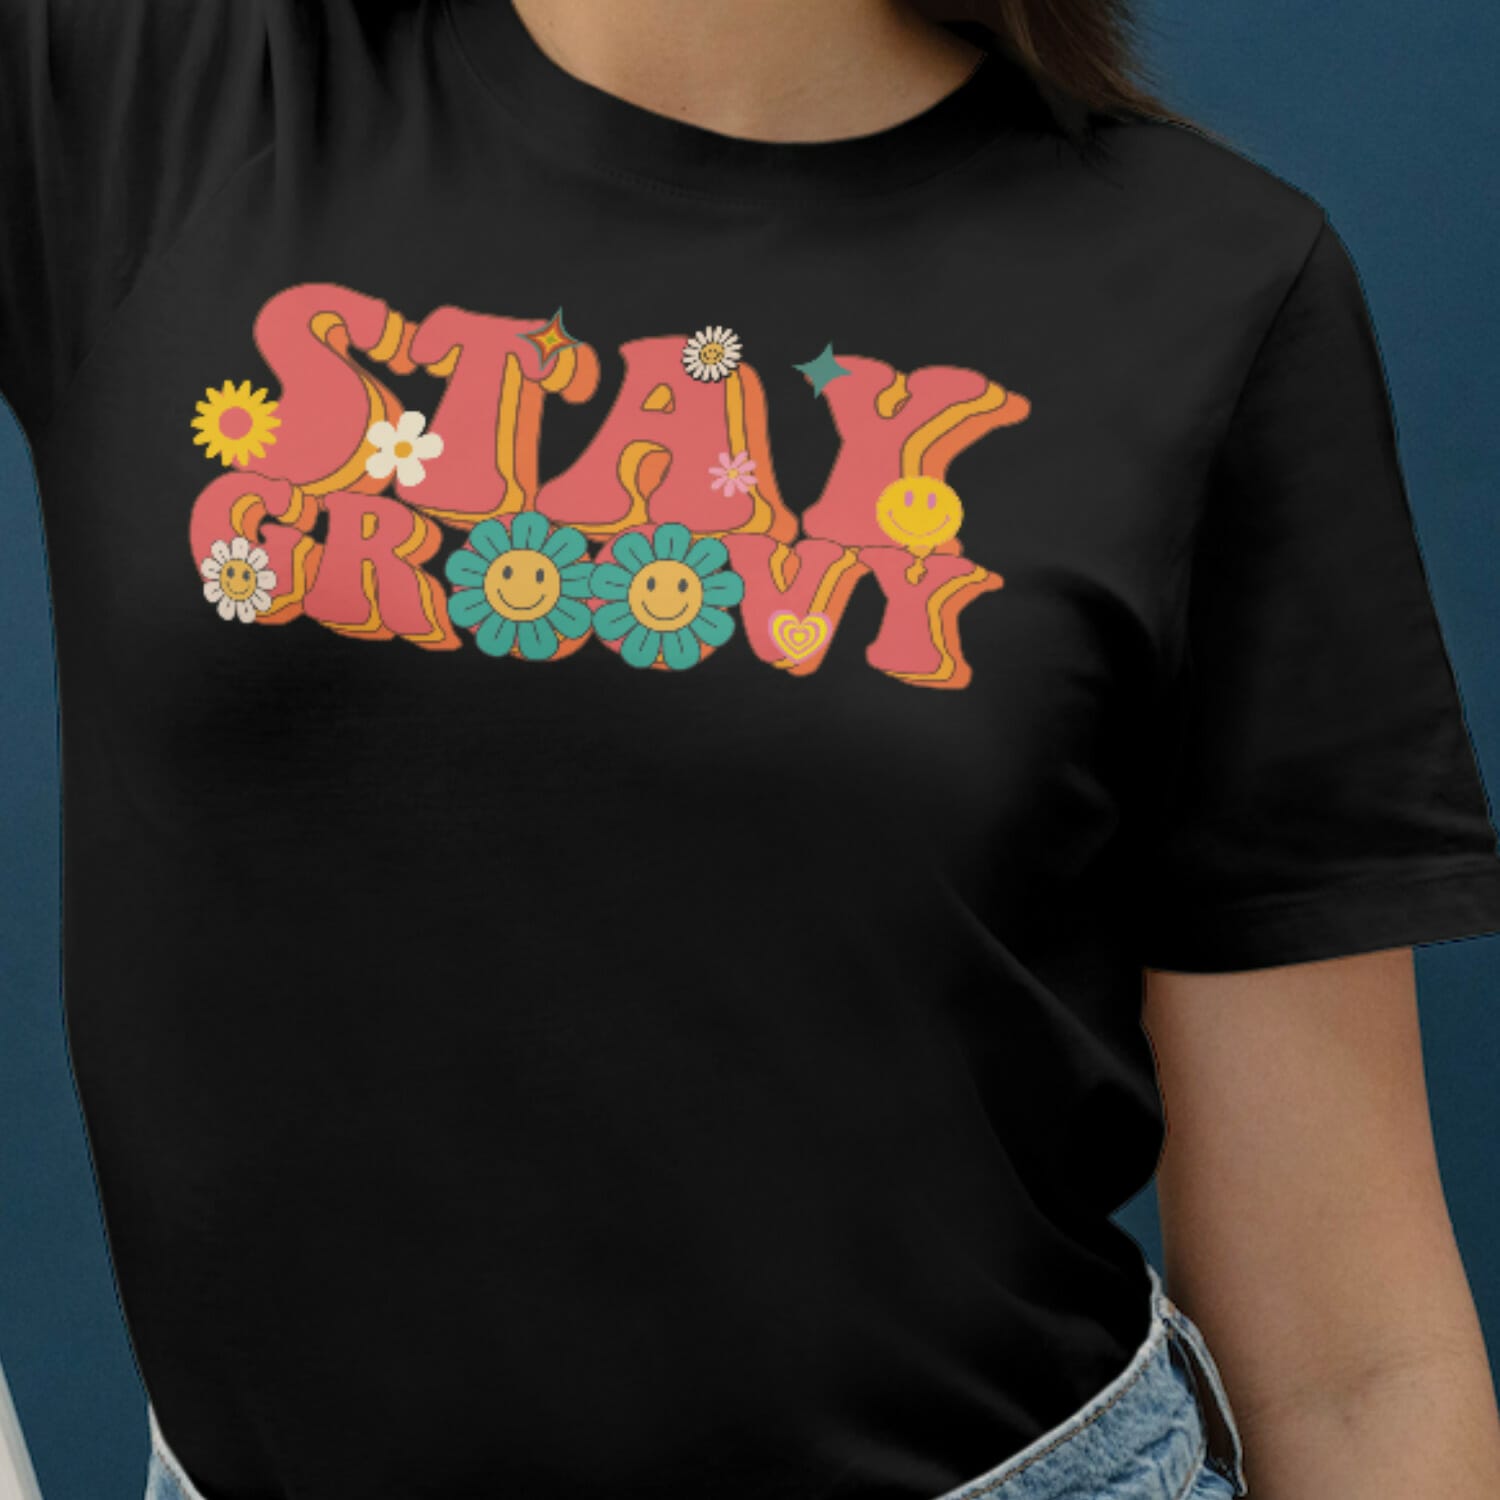 Stay Groovy - Flowers T-Shirt Design For Girls